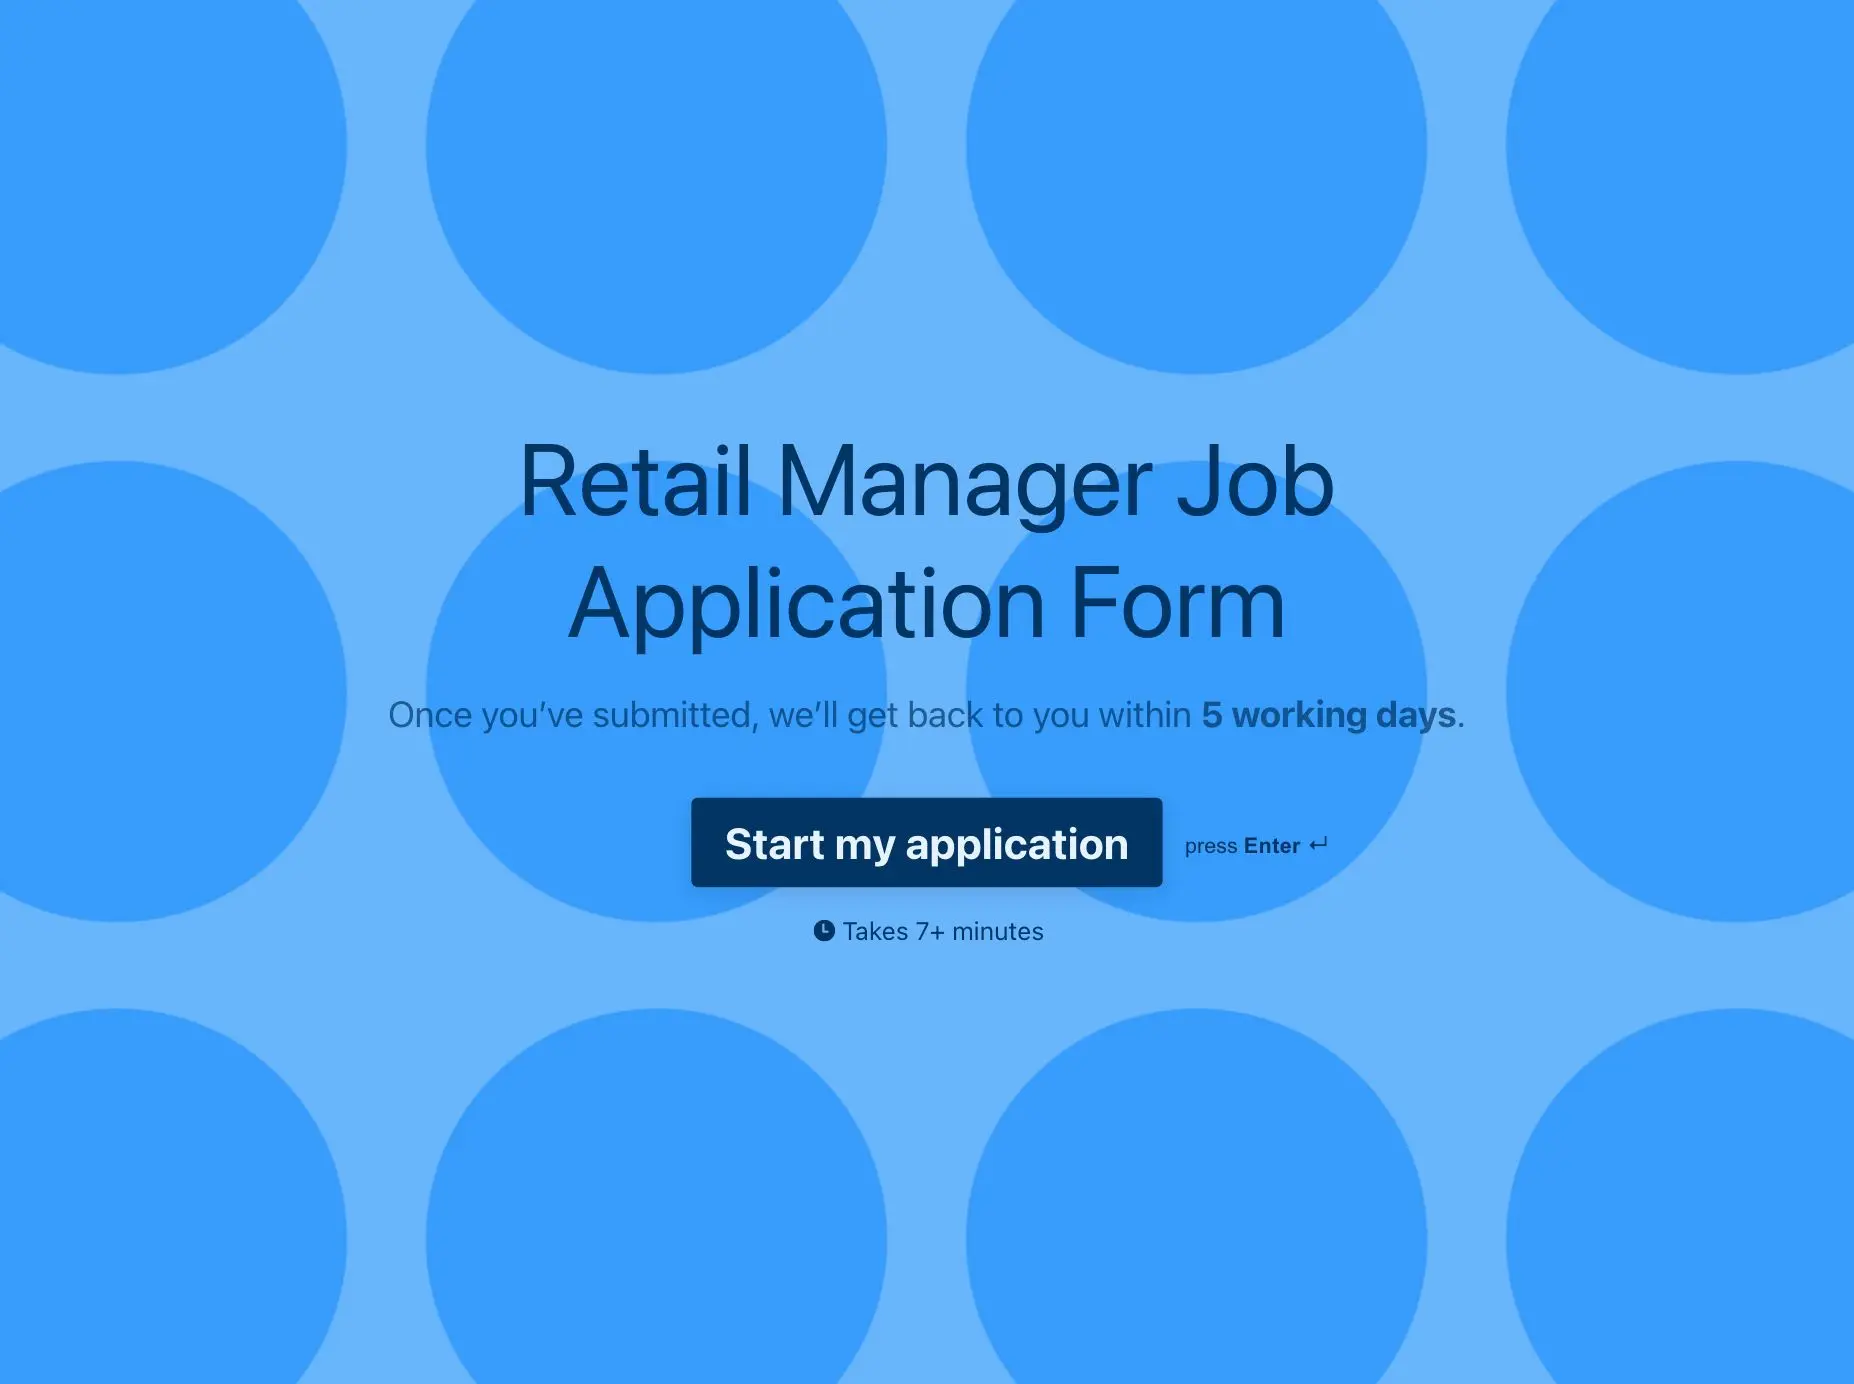 Retail Manager Job Application Form Template Hero